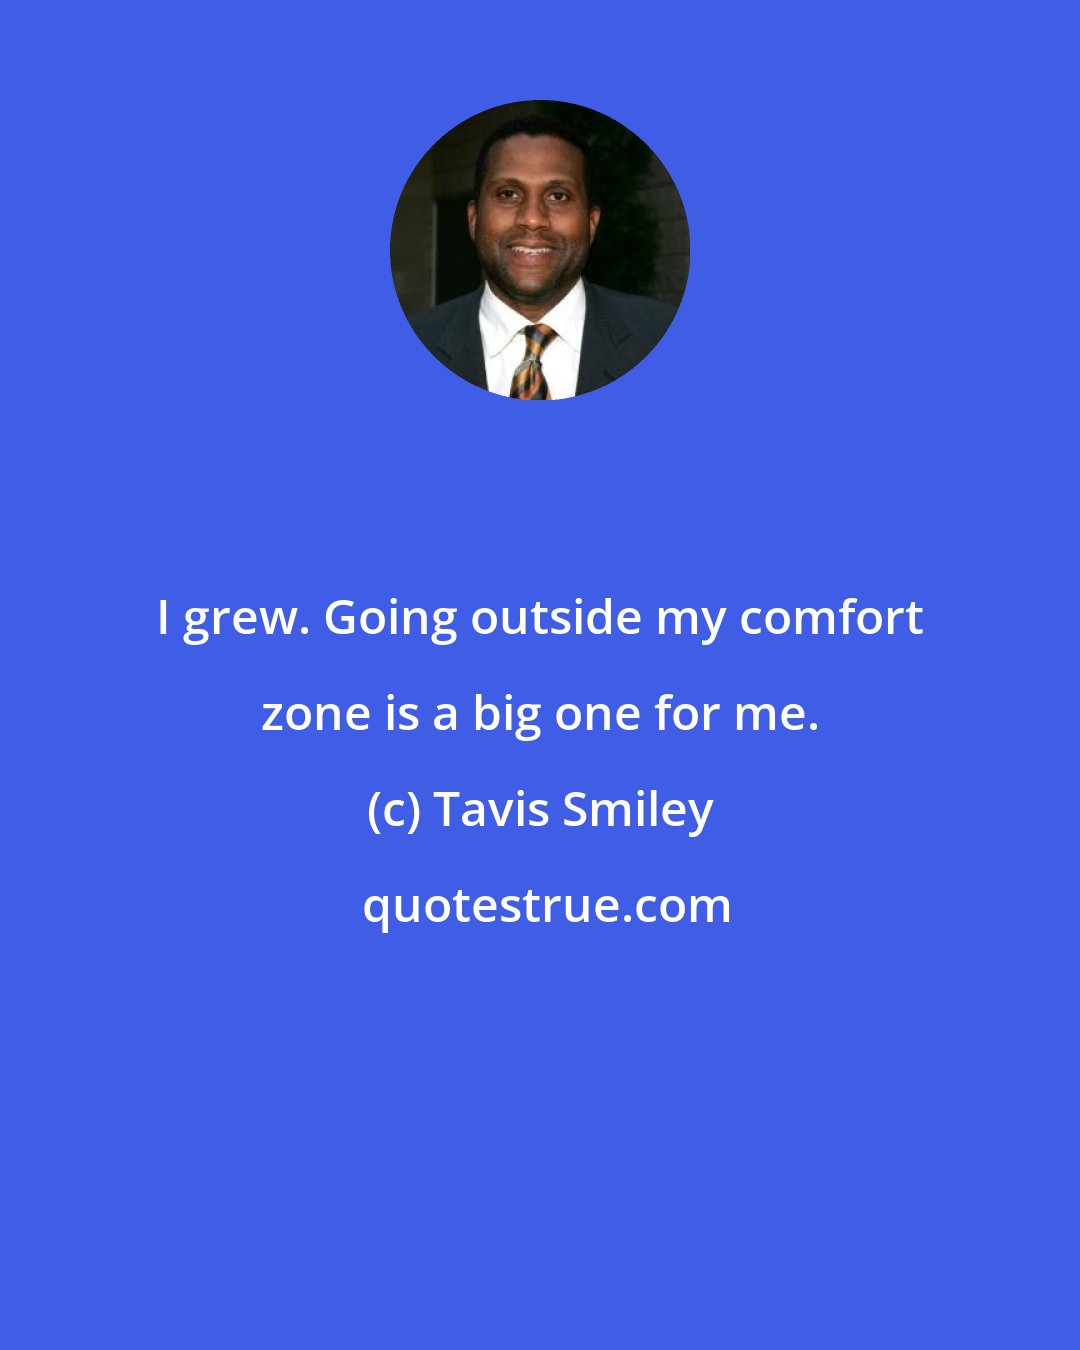 Tavis Smiley: I grew. Going outside my comfort zone is a big one for me.